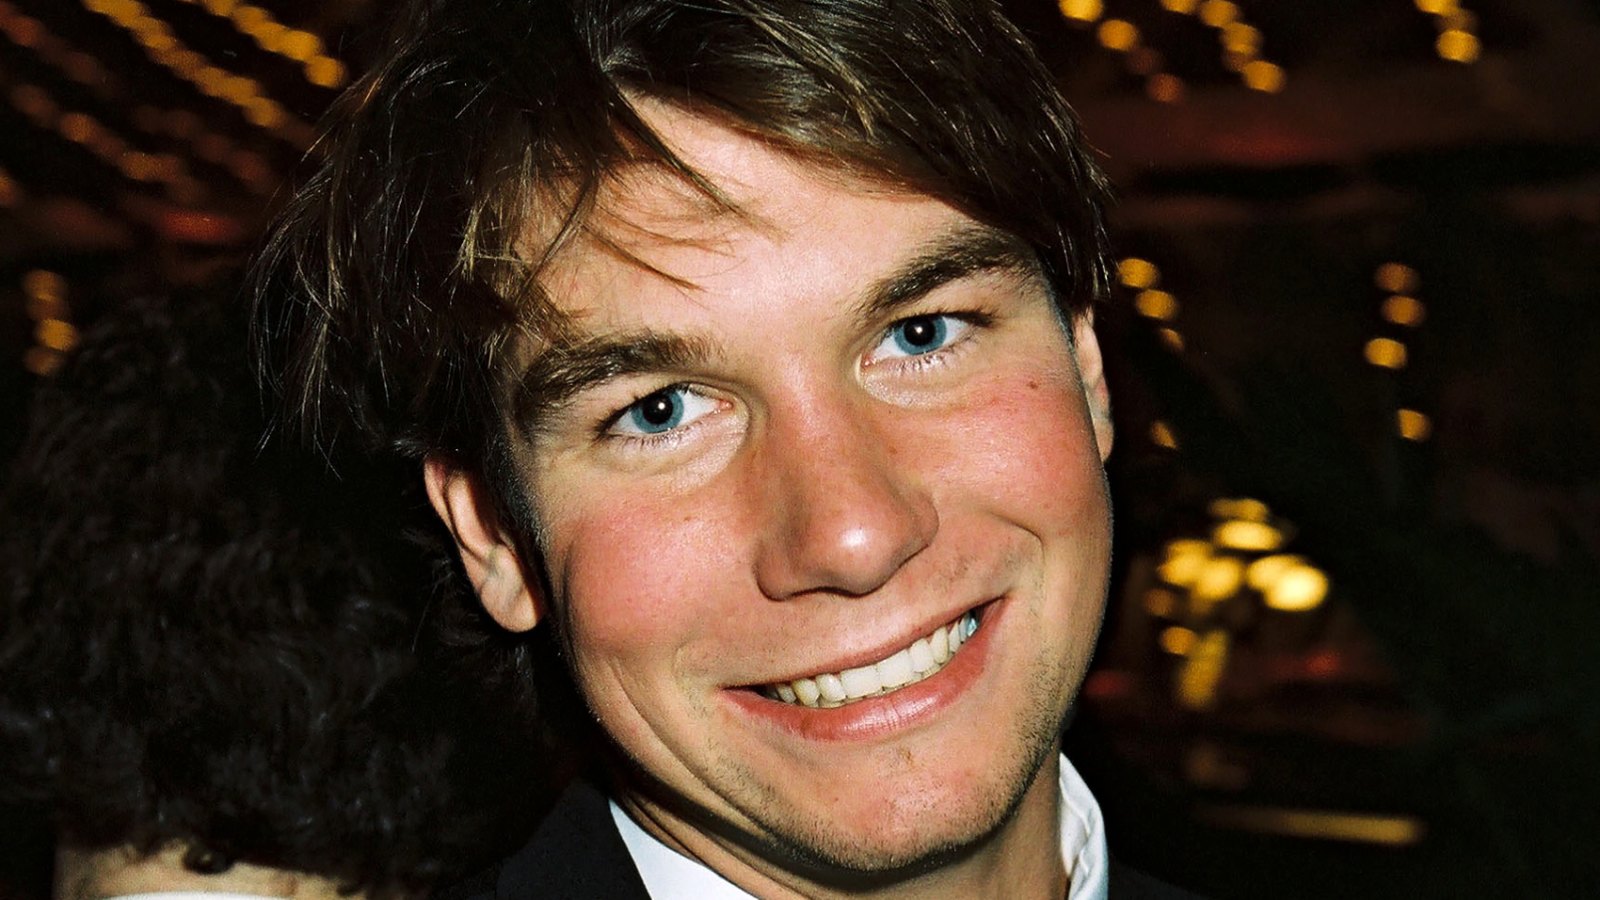 Jerry O’Connell Rented a Tux for a Golden Globe 'Jerry Maguire' Party